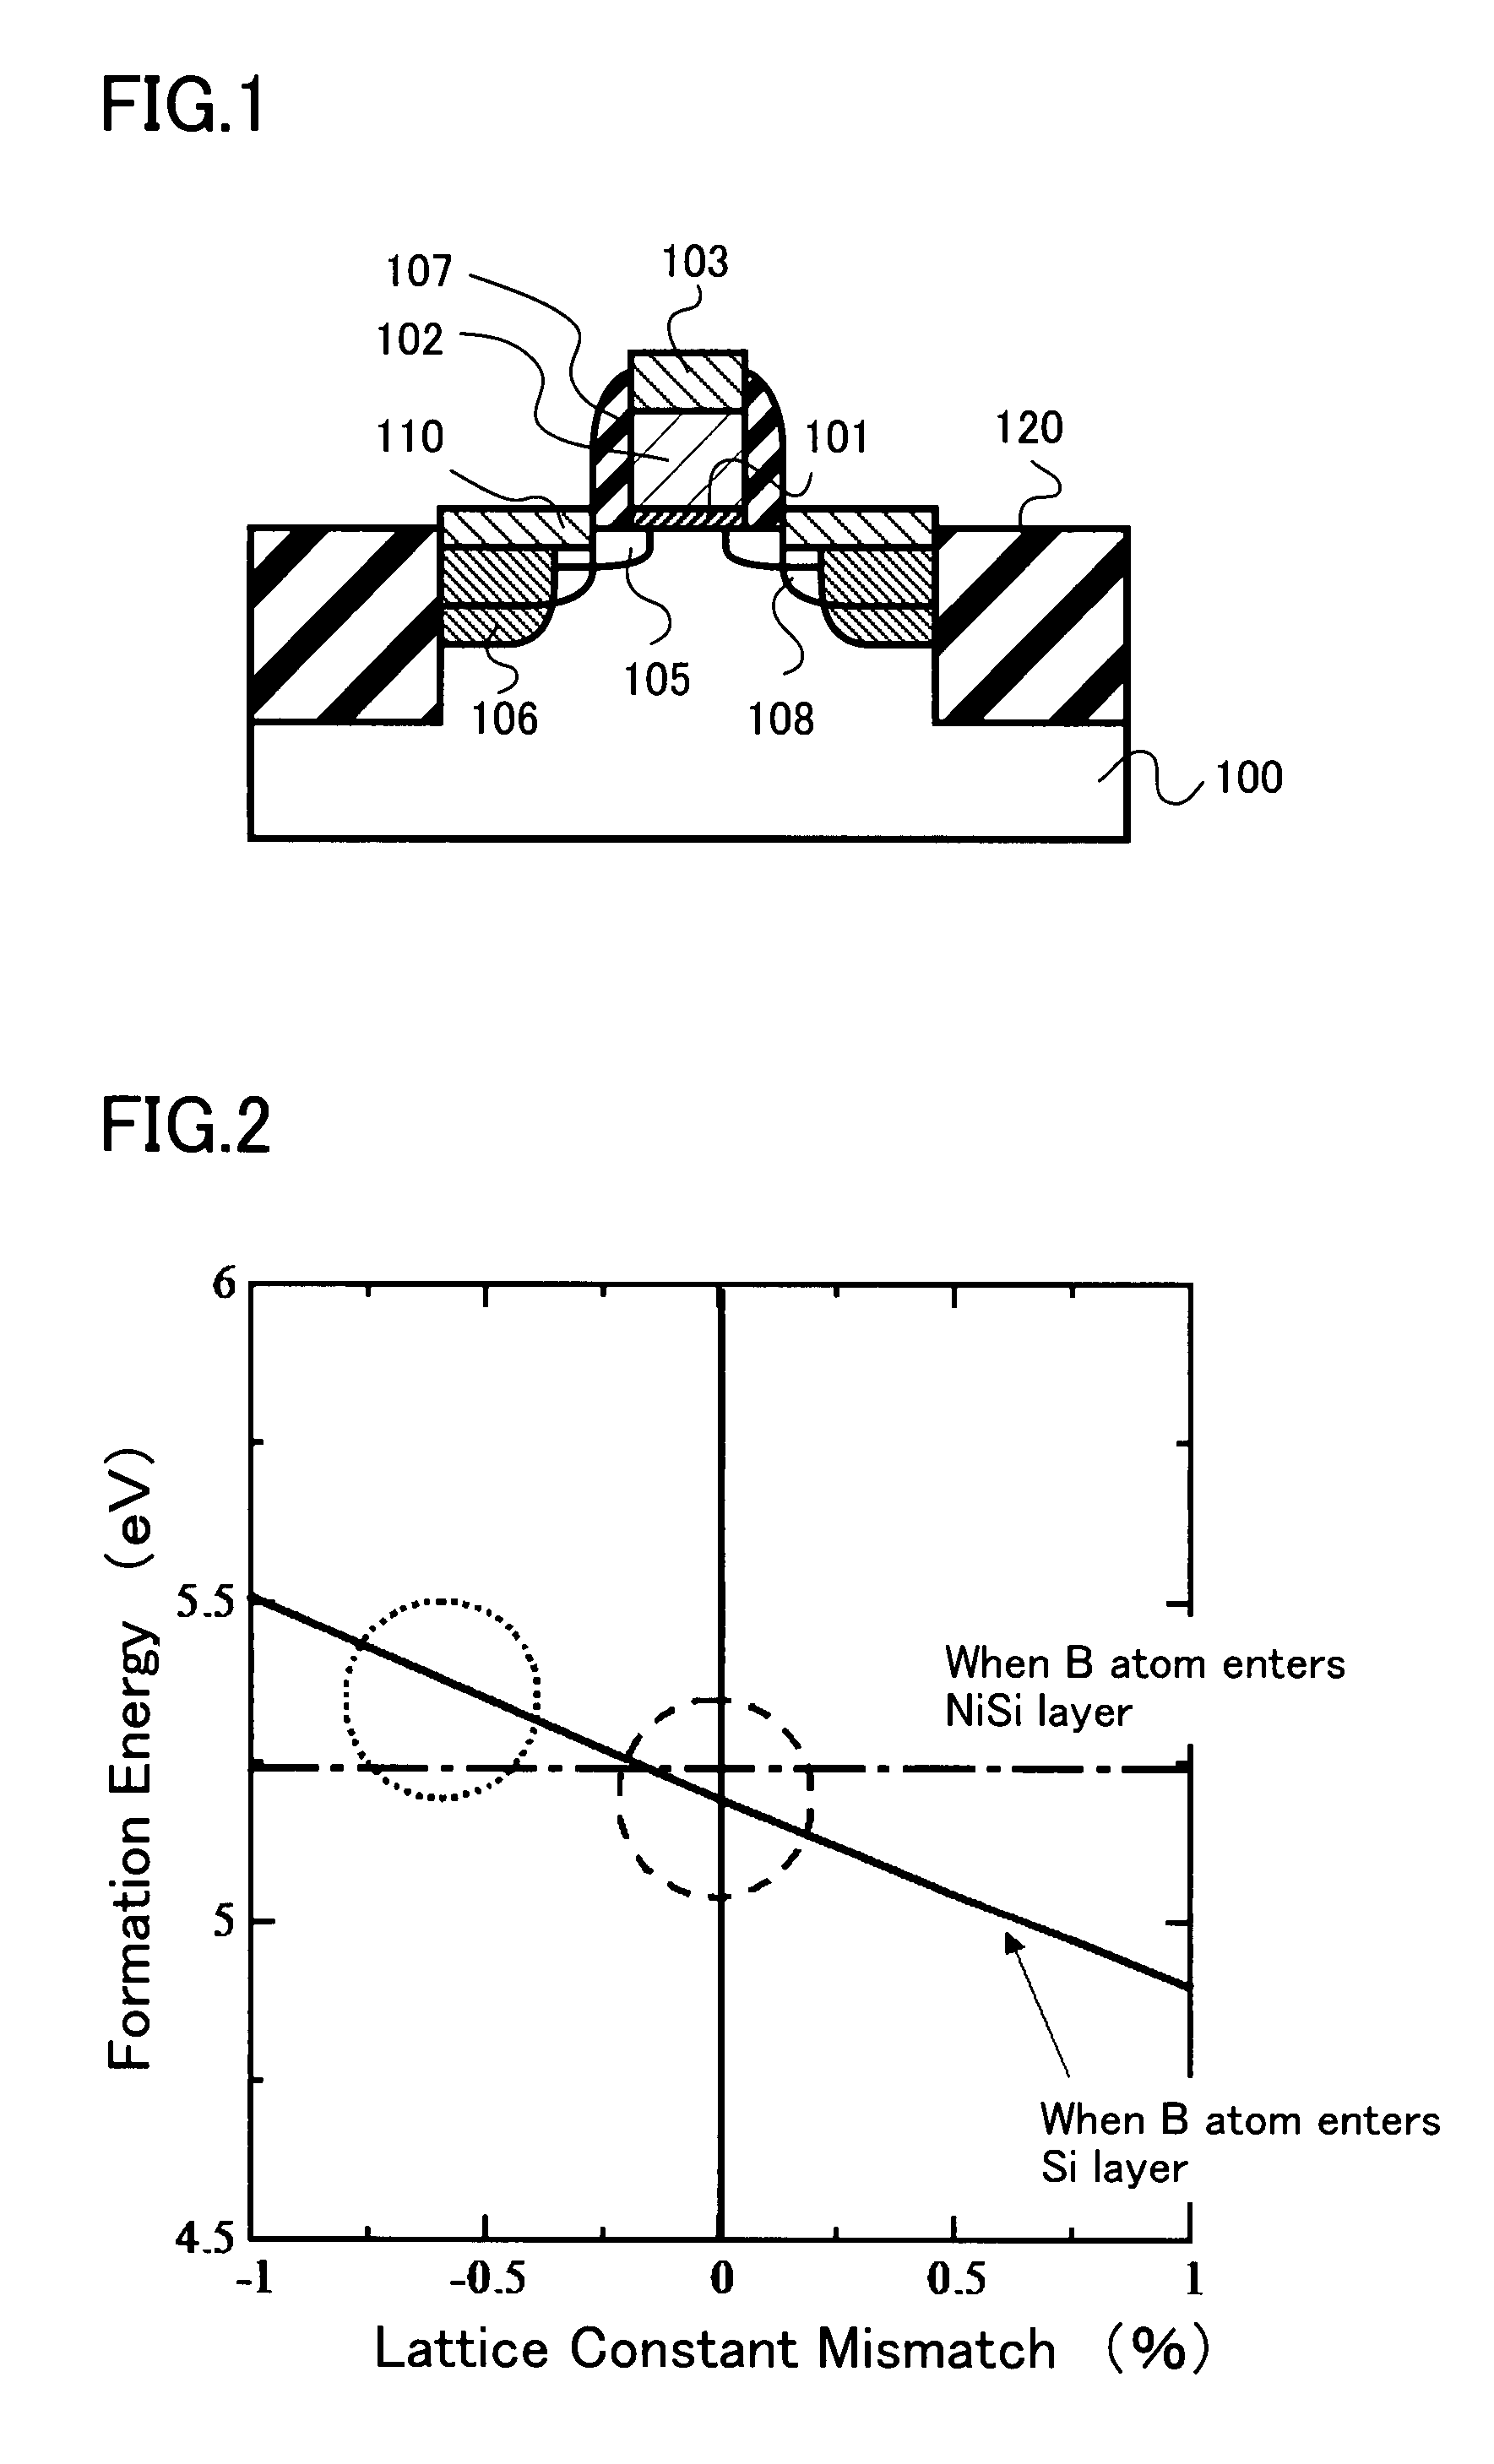 Method of forming a silicide layer while applying a compressive or tensile strain to impurity layers